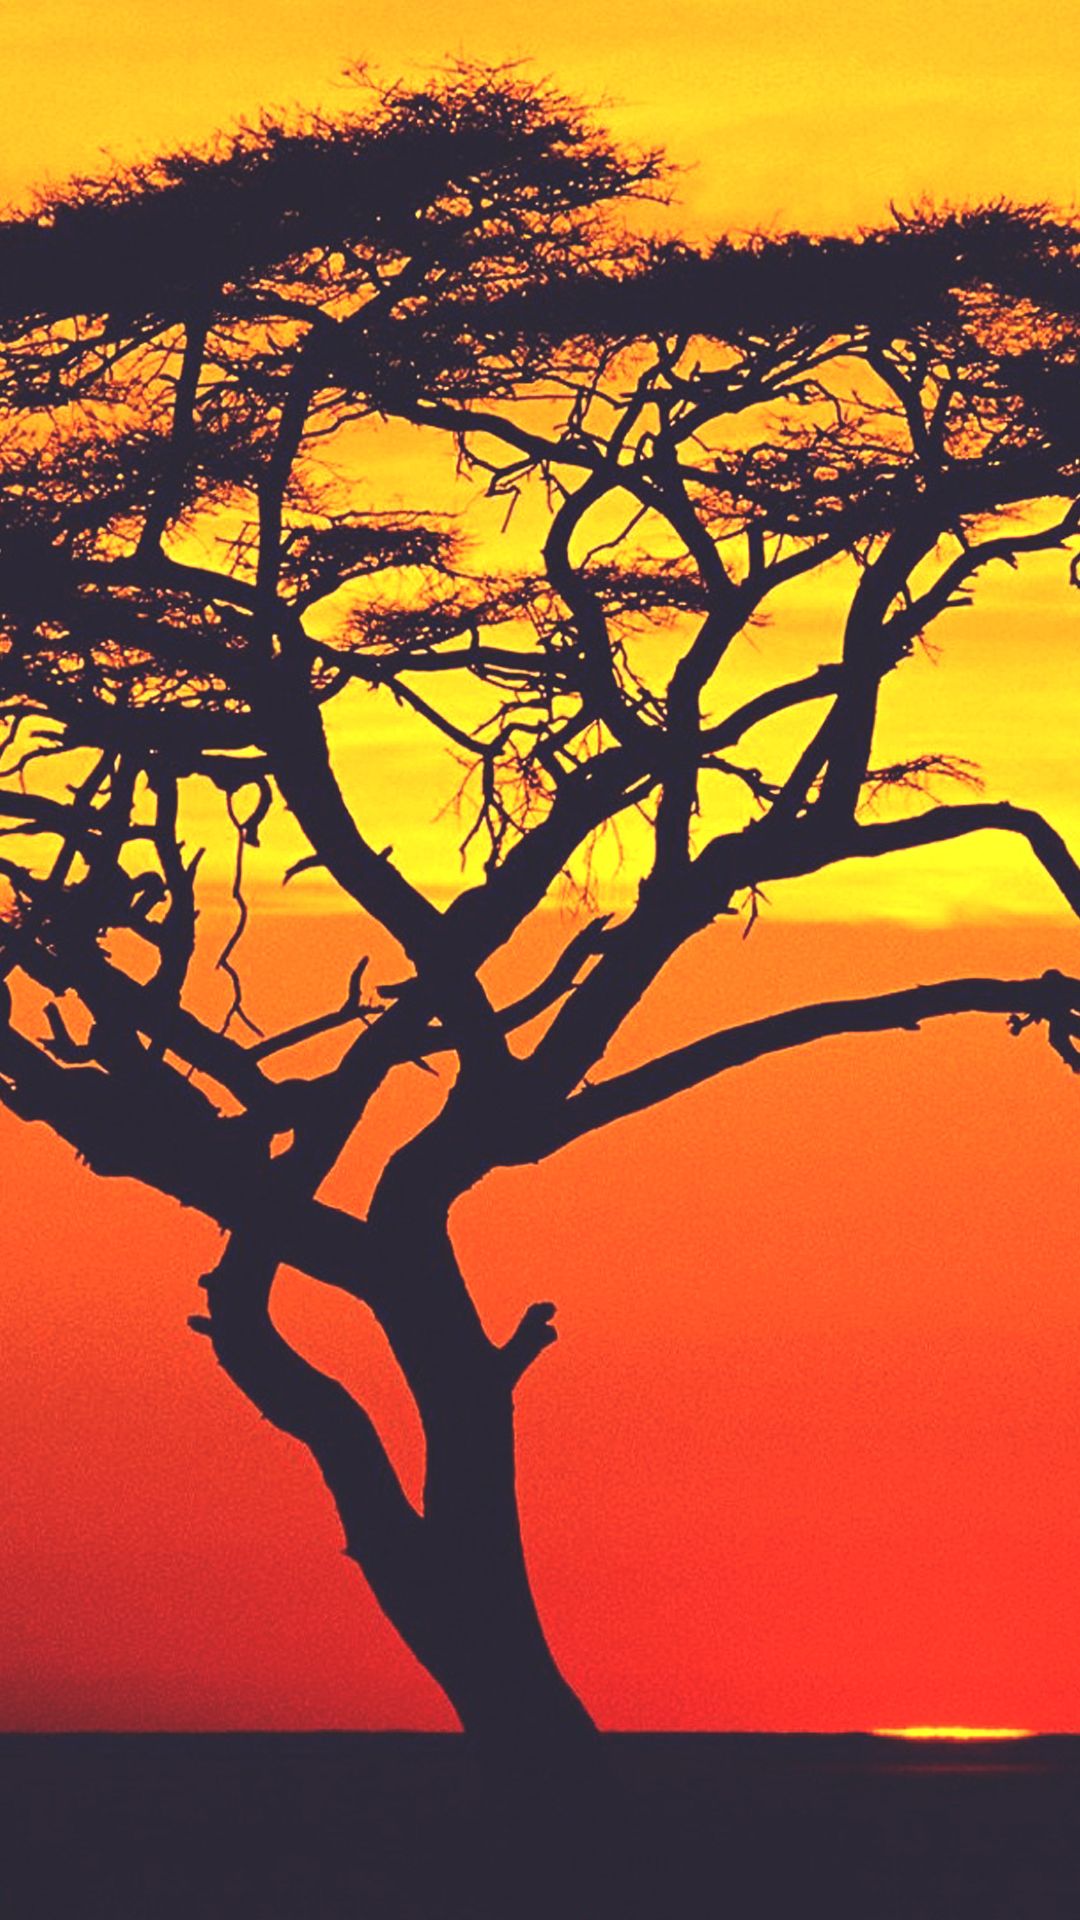 Sunset In Africa Lonely Tree Android Wallpaper free download